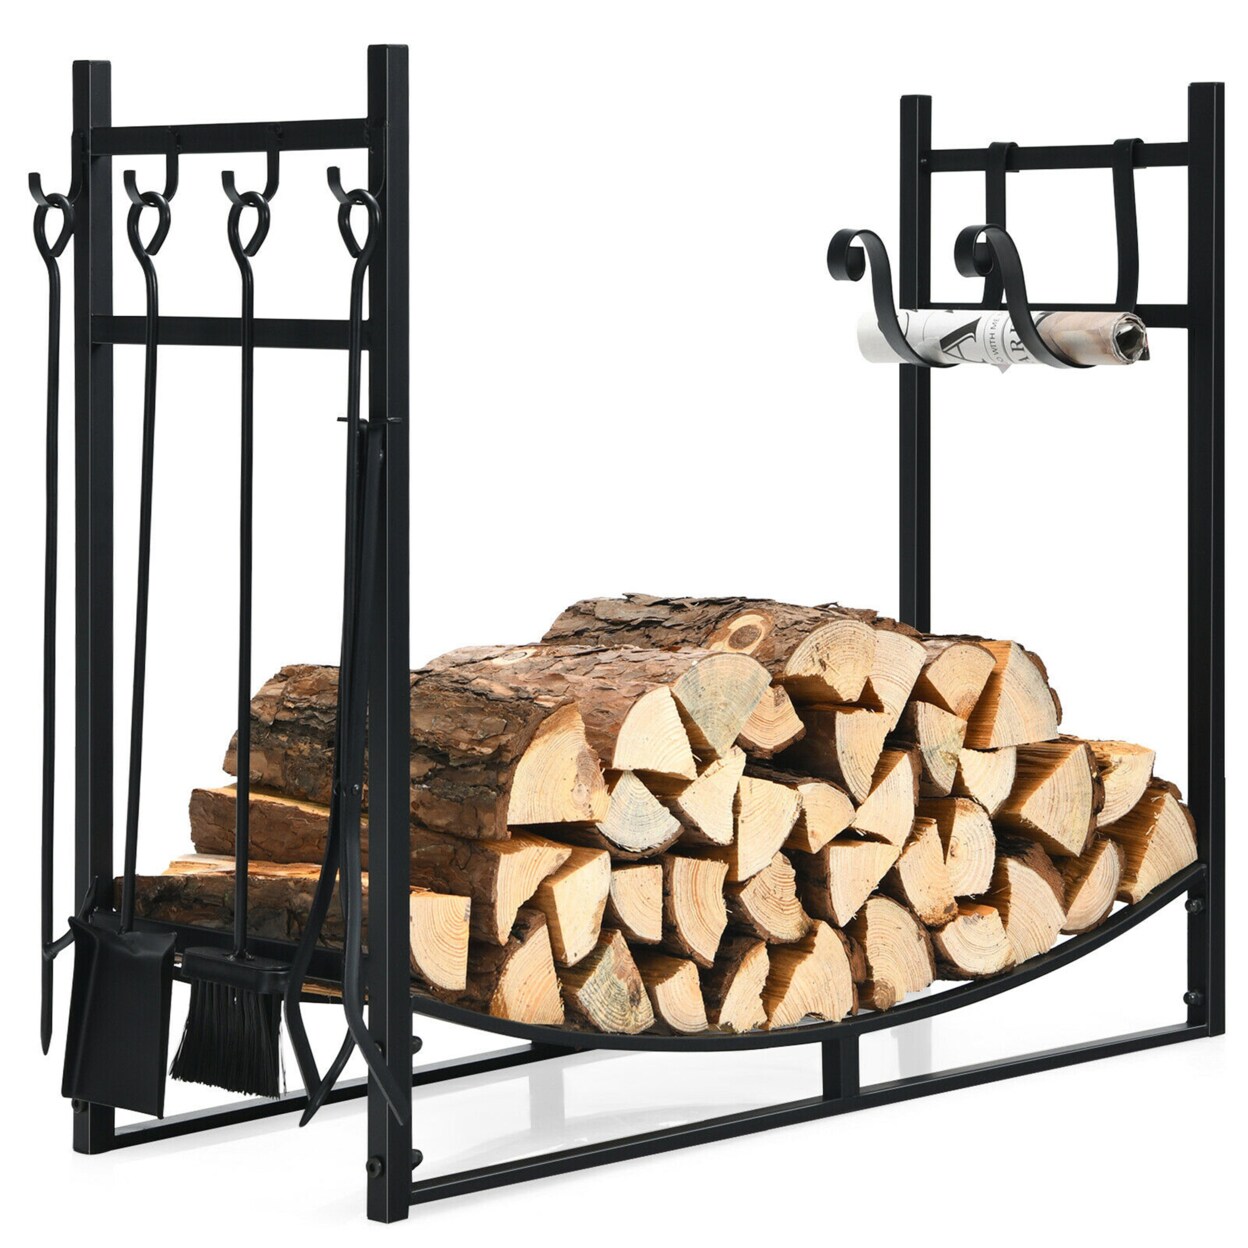 Gymax 36 Fireplace Log Rack W/ 4 Tool Set Kindling Holders for Indoor Outdoor